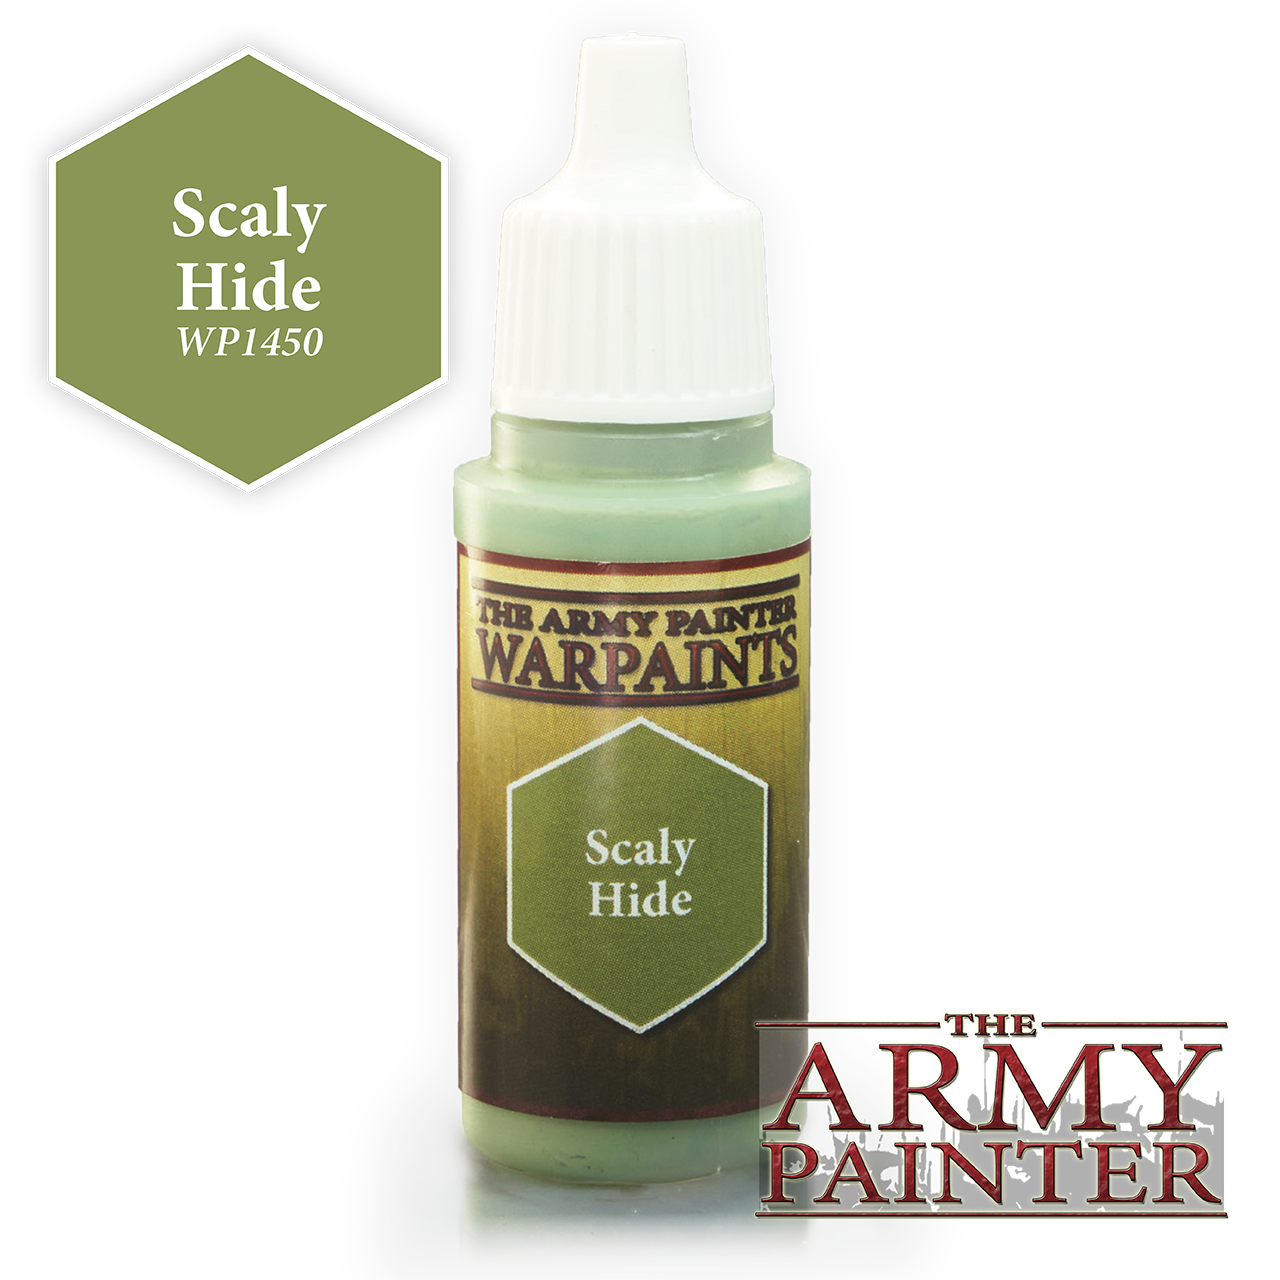 The Army Painter Warpaints: Scaly Hide (18ml)